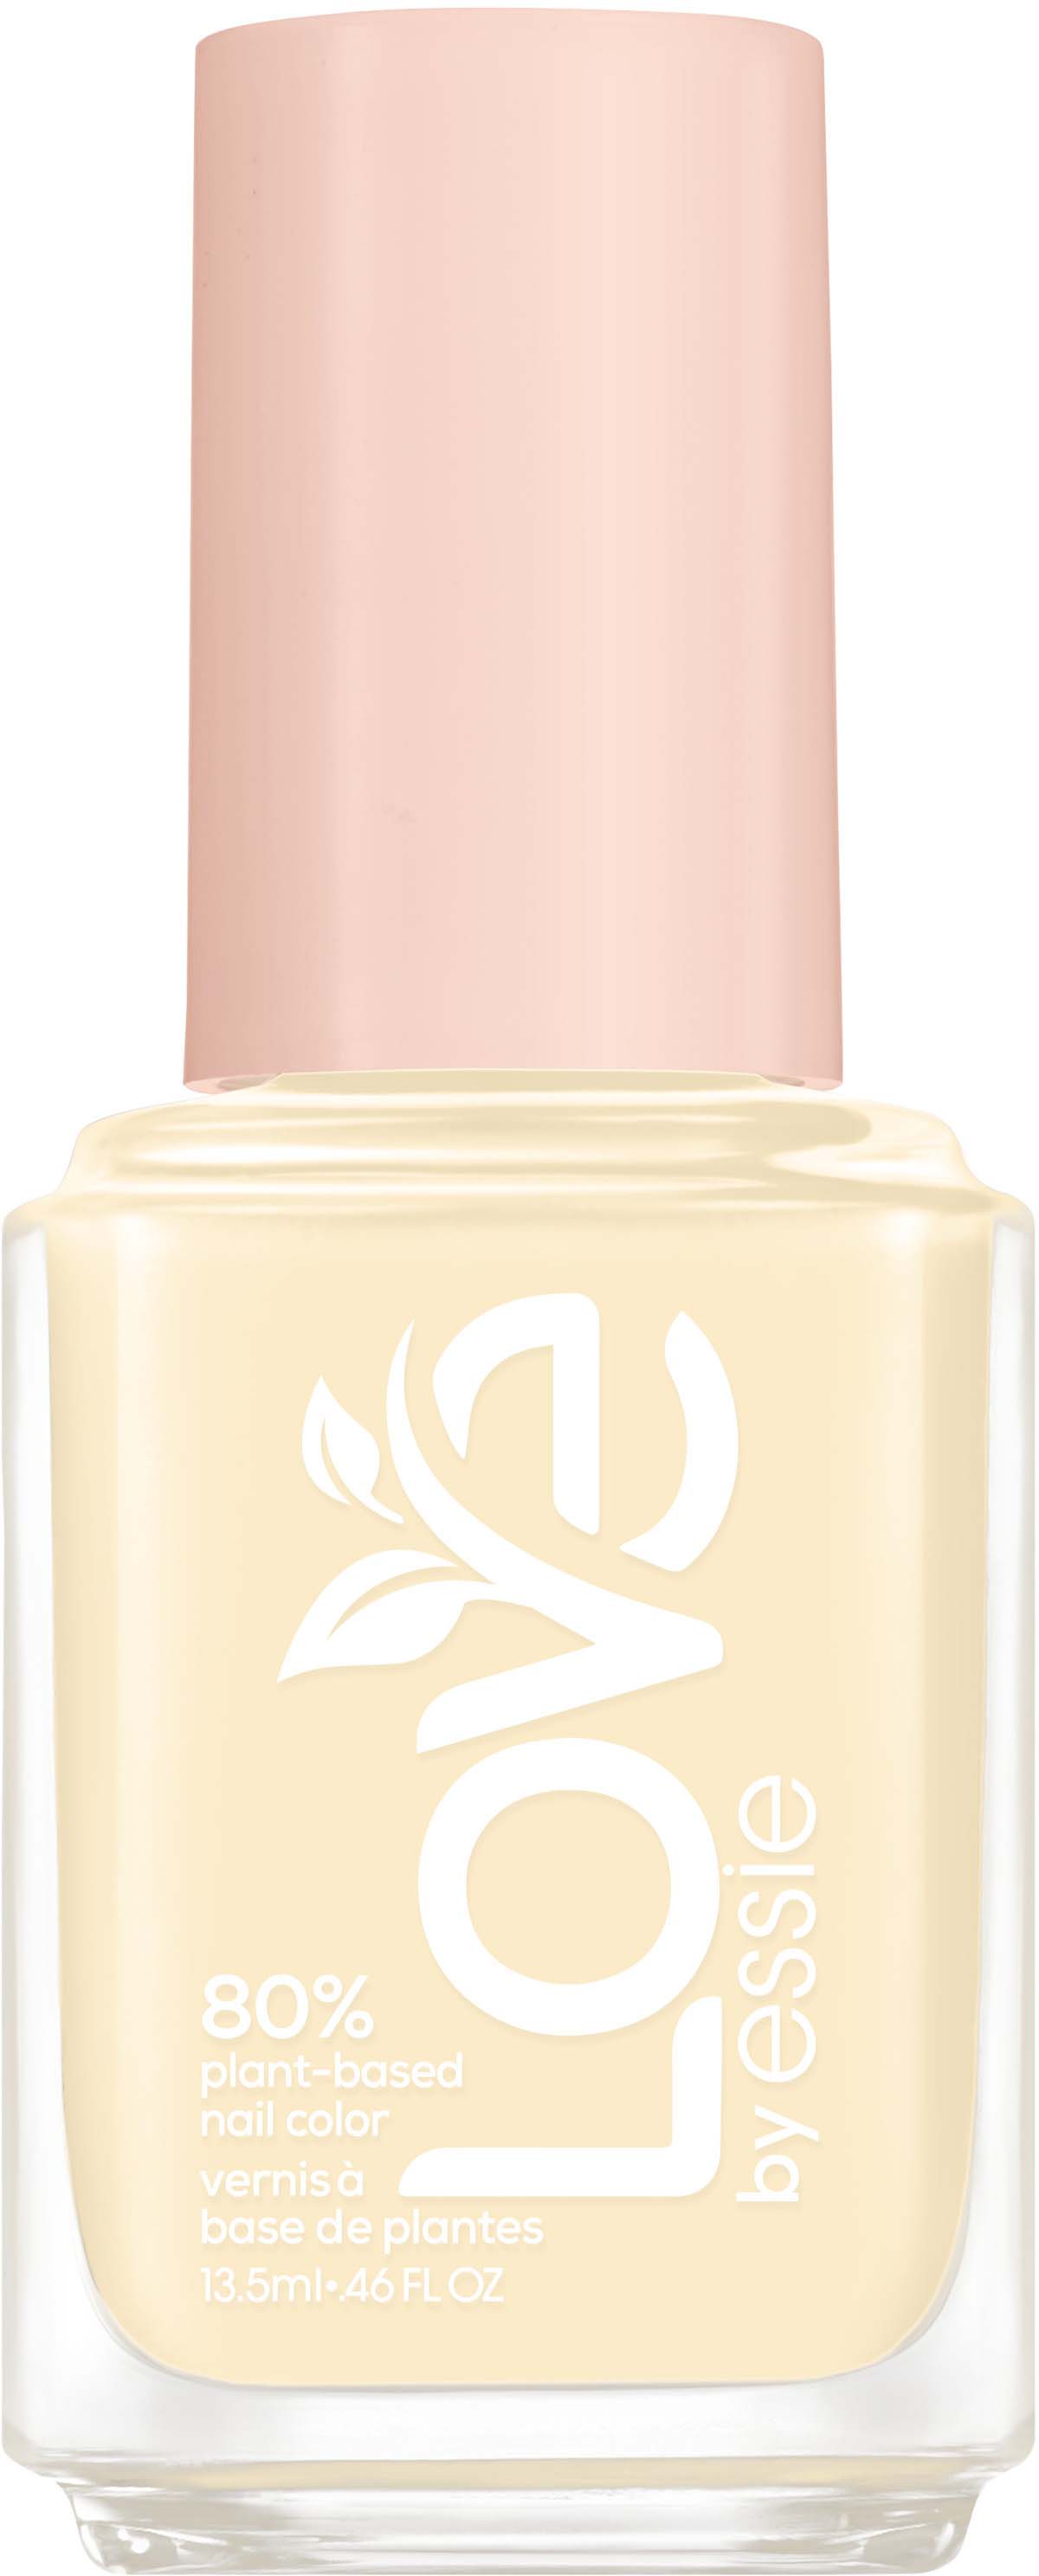 Plant-based 230 The by Essie LOVE On Essie Nail Color 80% Brighter Side